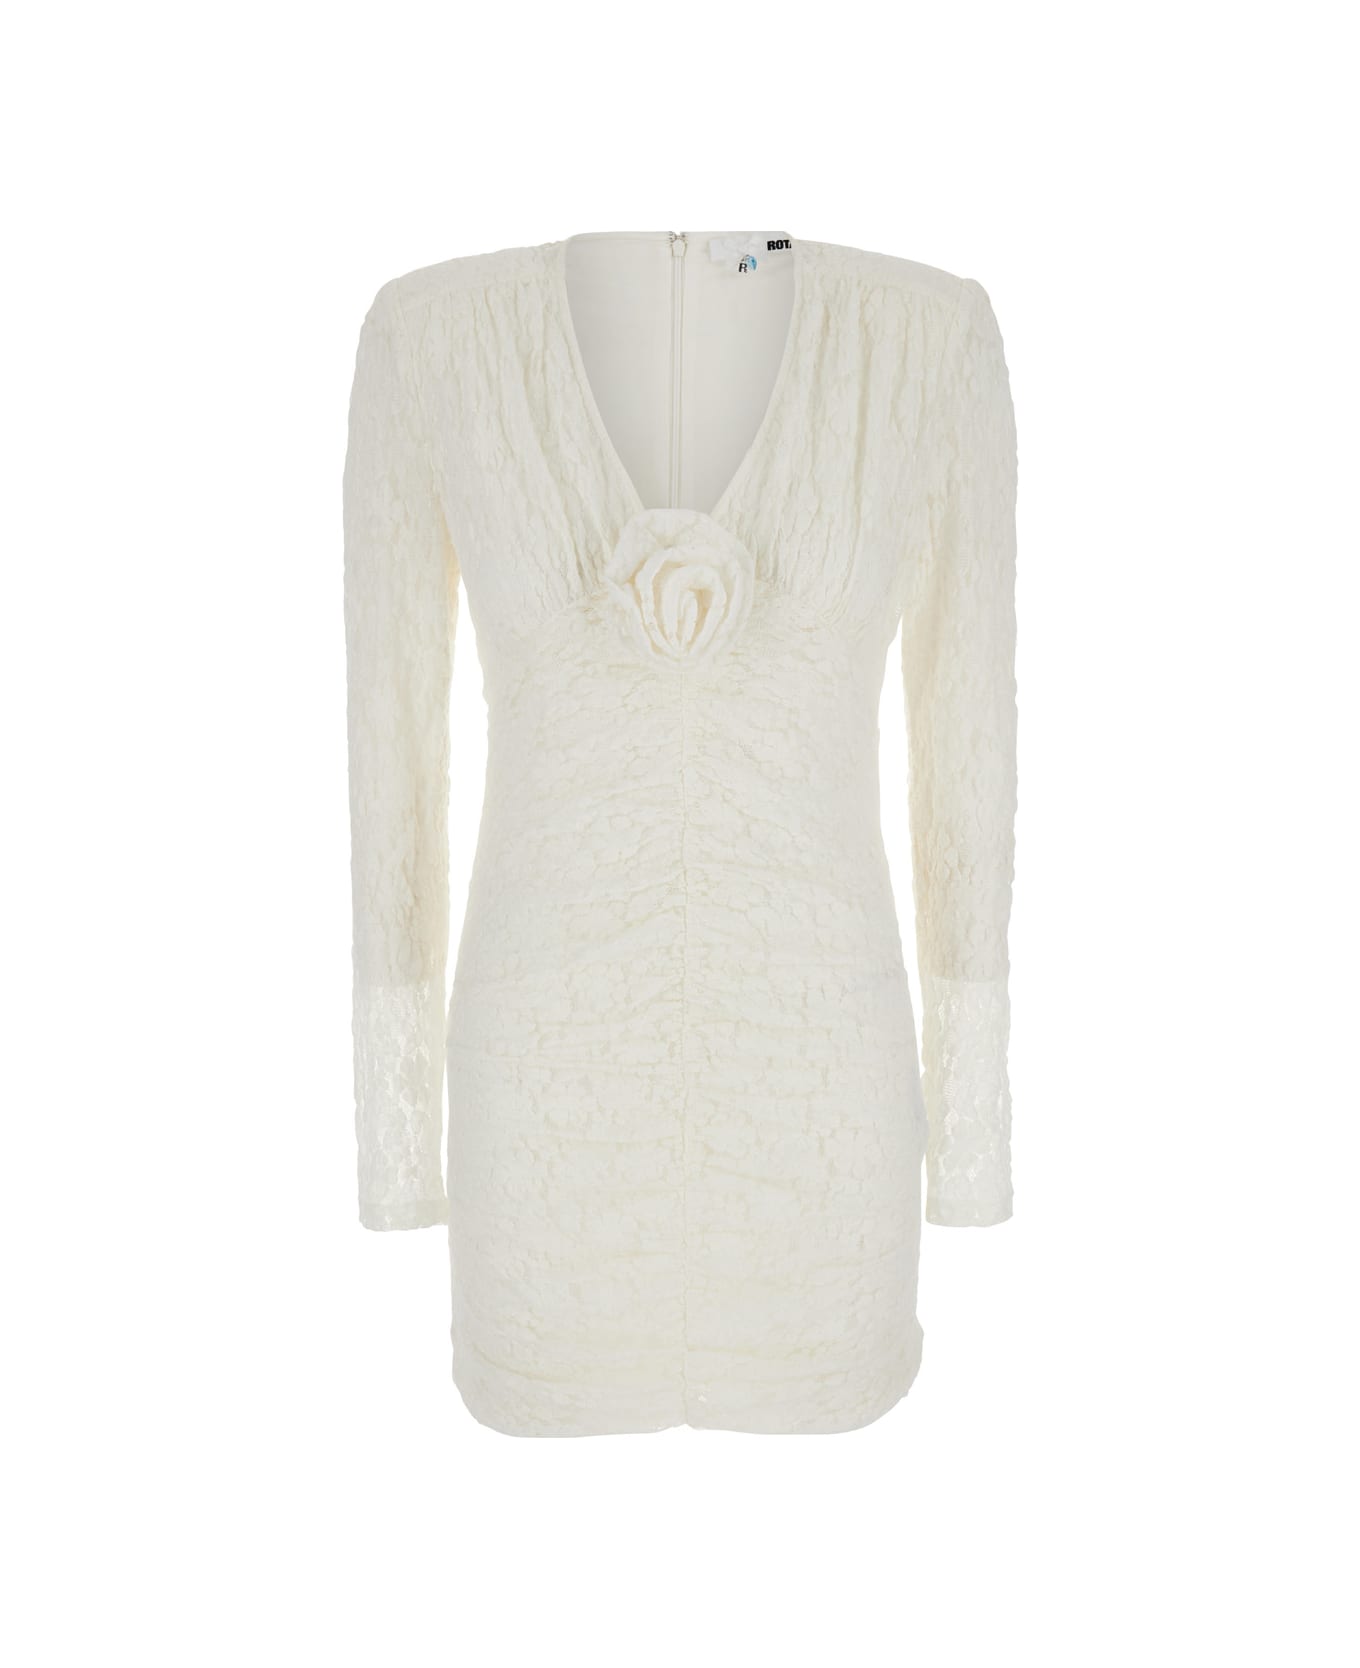 Rotate by Birger Christensen Mini White Dress With Rose Patch In Lace Woman - Egret